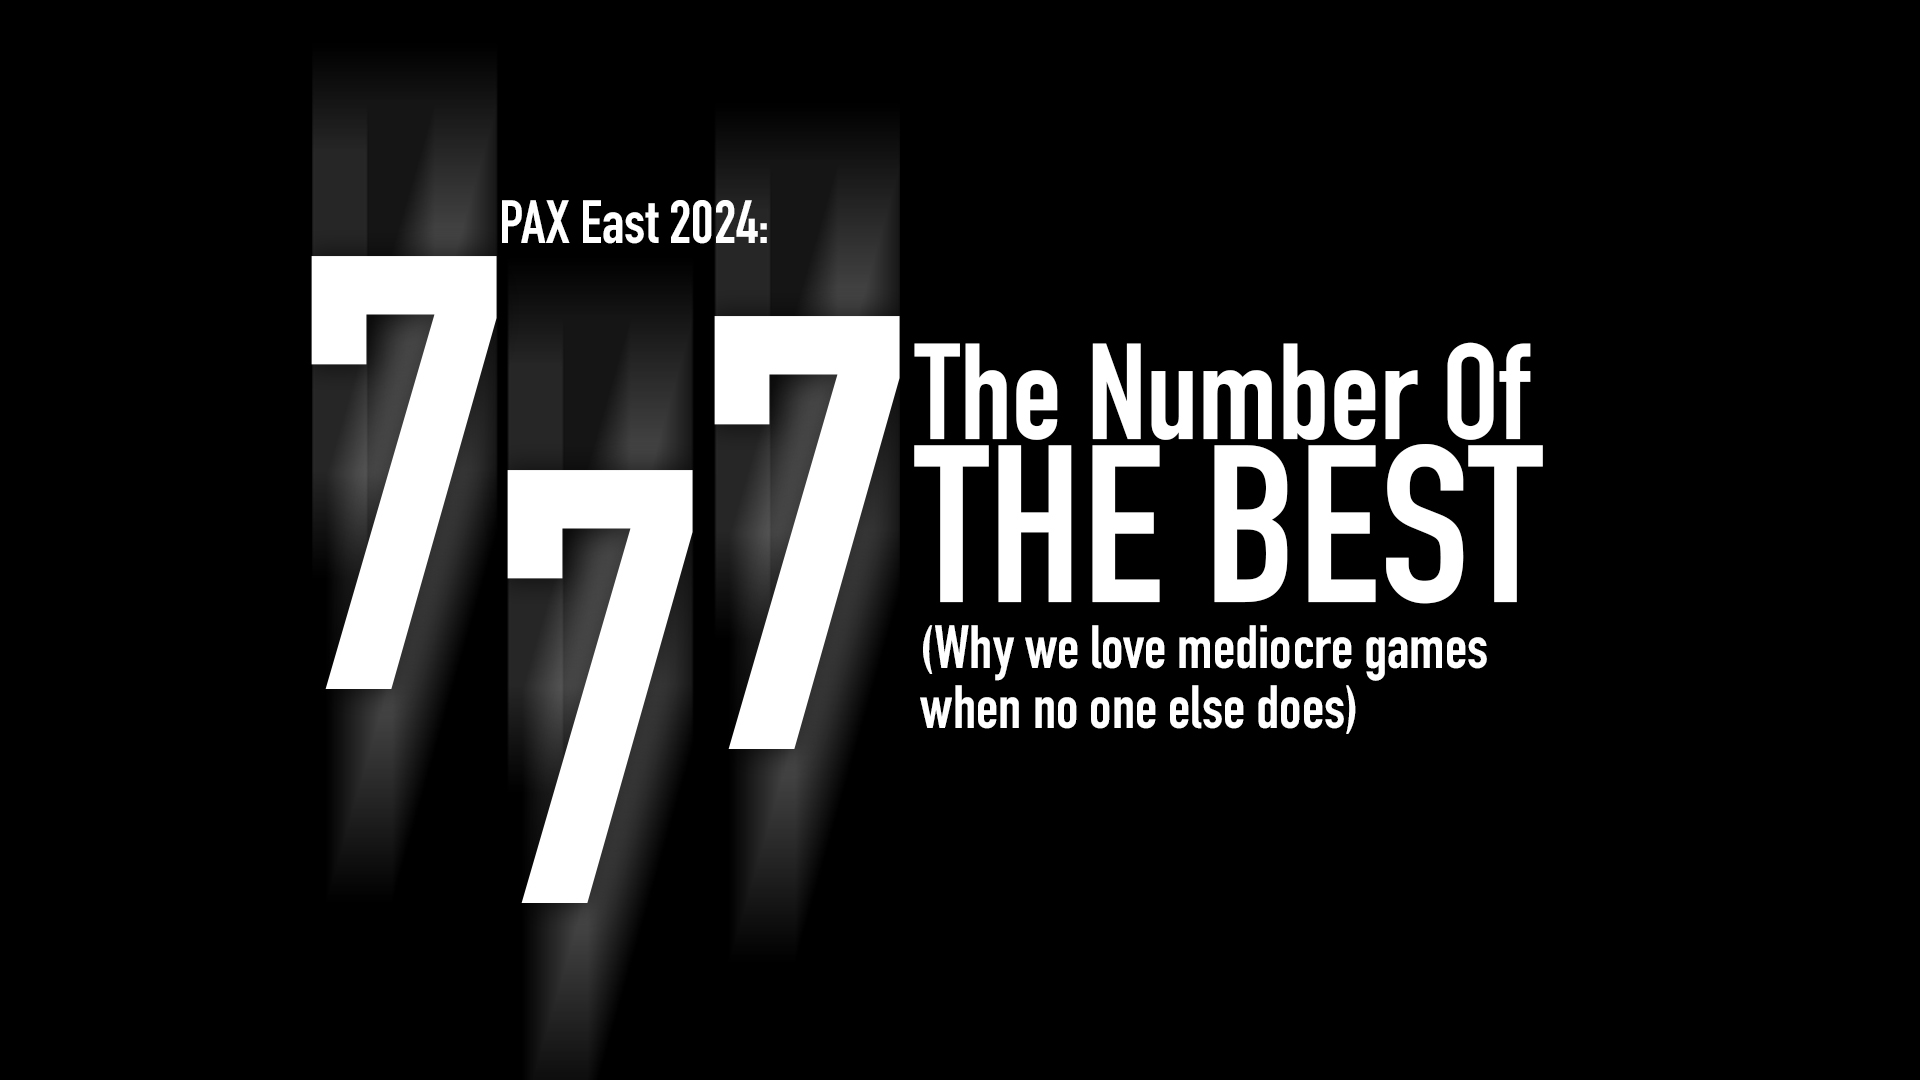 Join Team SideQuesting at our 2024 PAX Panel: 7-7-7: The Number of the Best